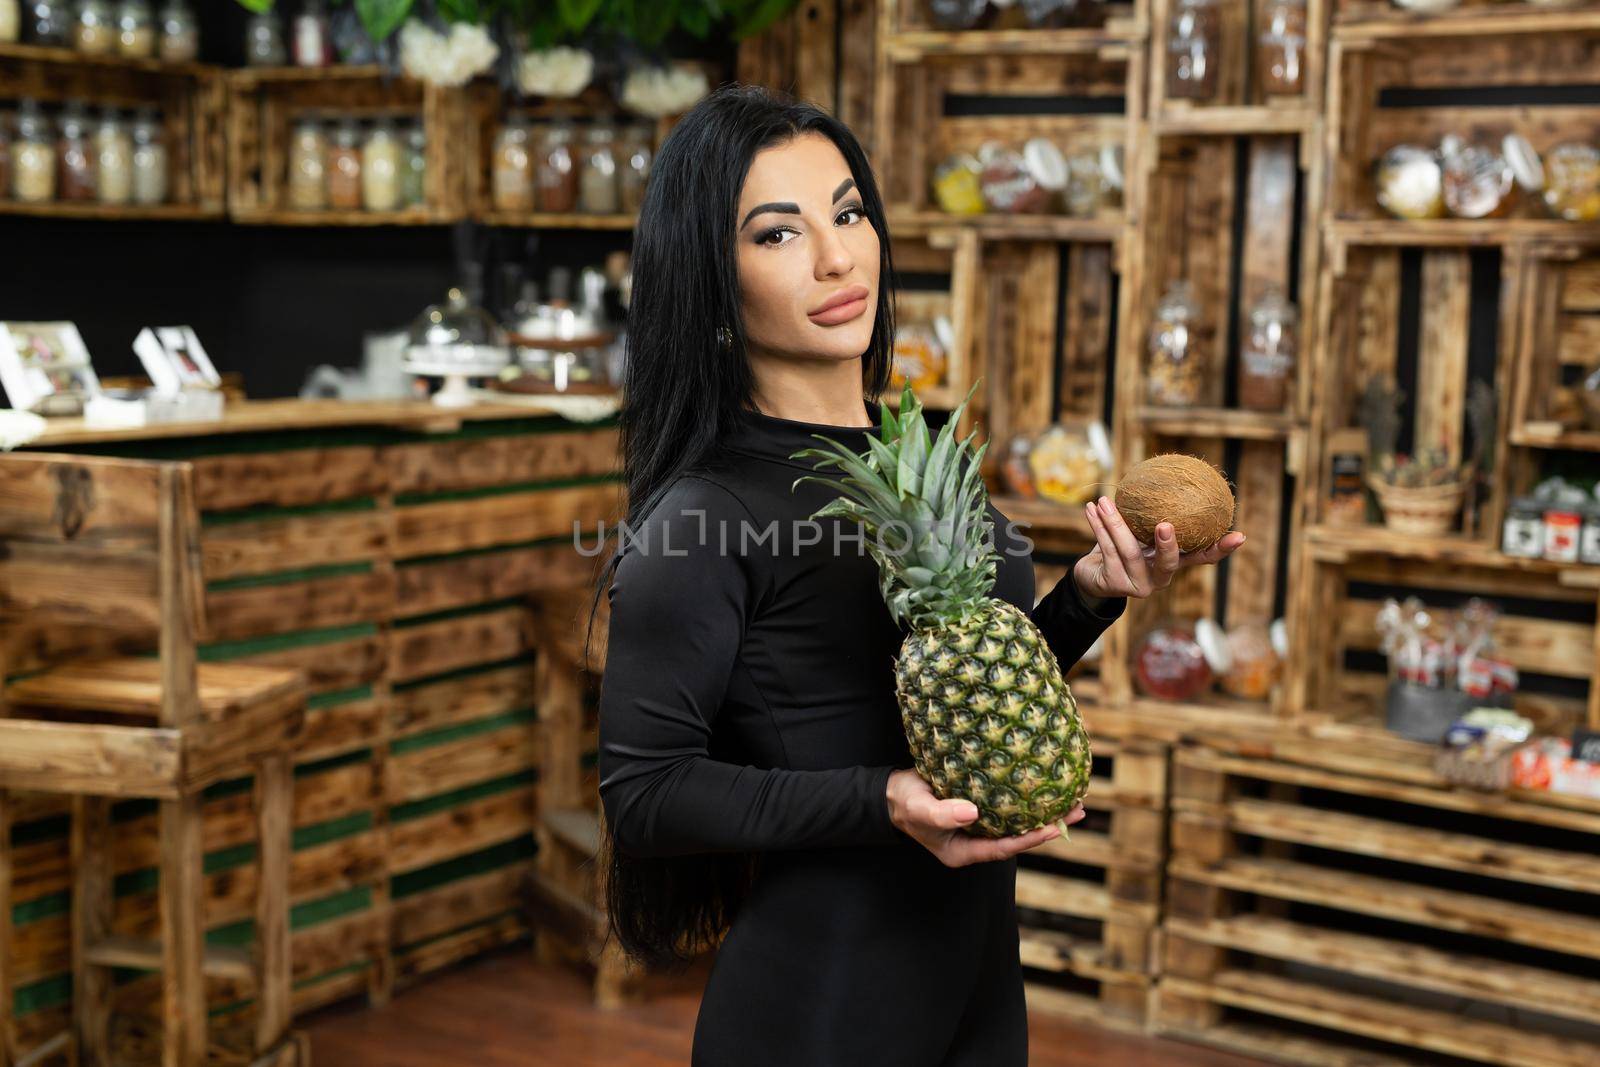 A young happy woman is holding and selling fresh fruit in a health food store by StudioPeace